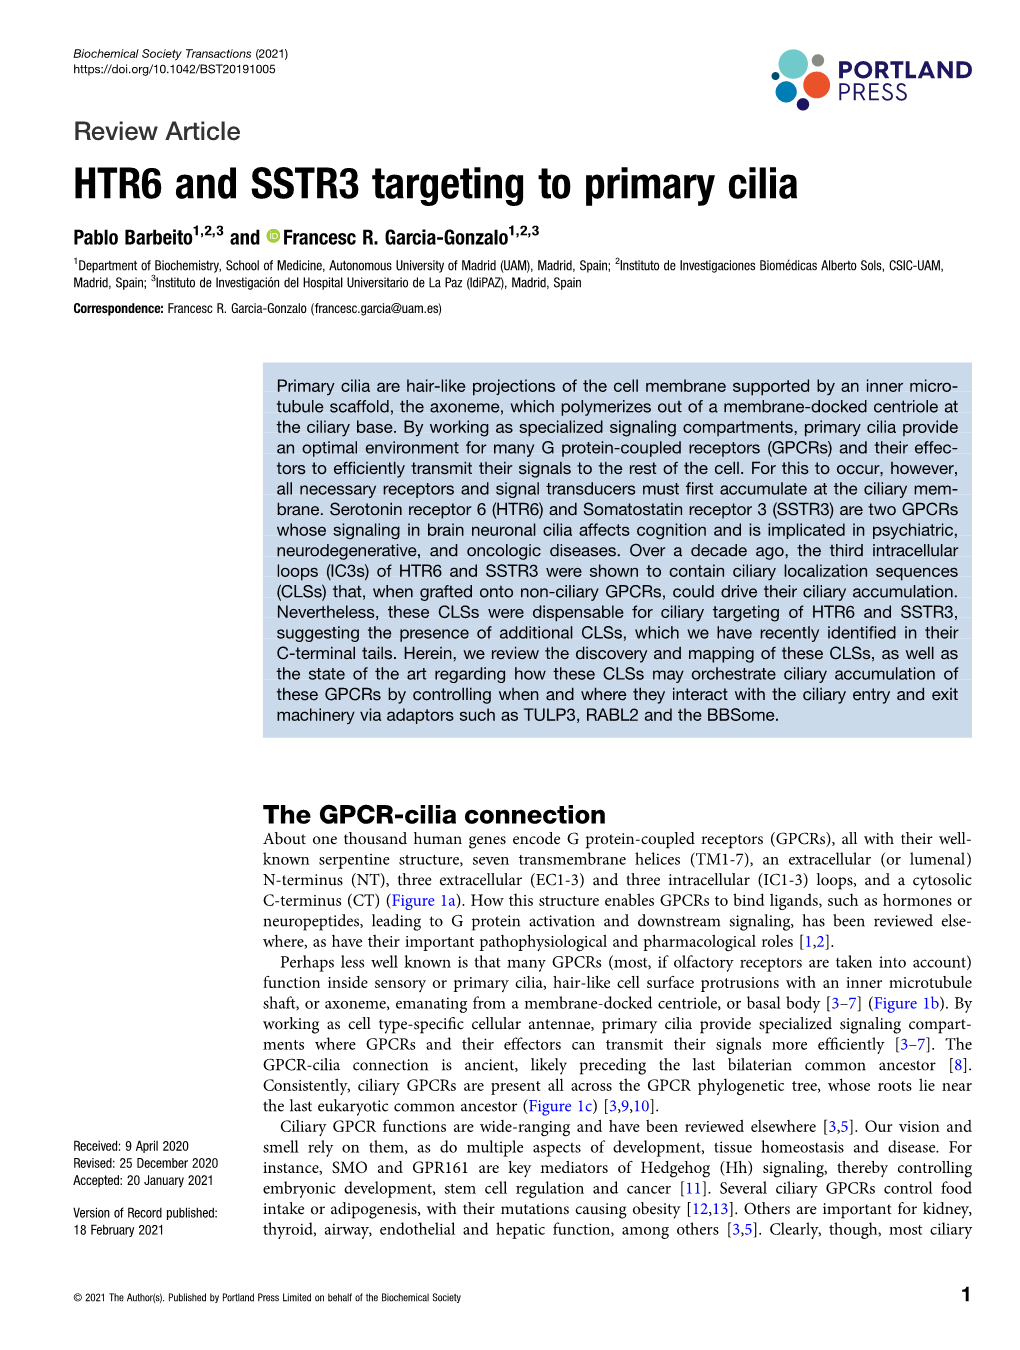 HTR6 and SSTR3 Targeting to Primary Cilia